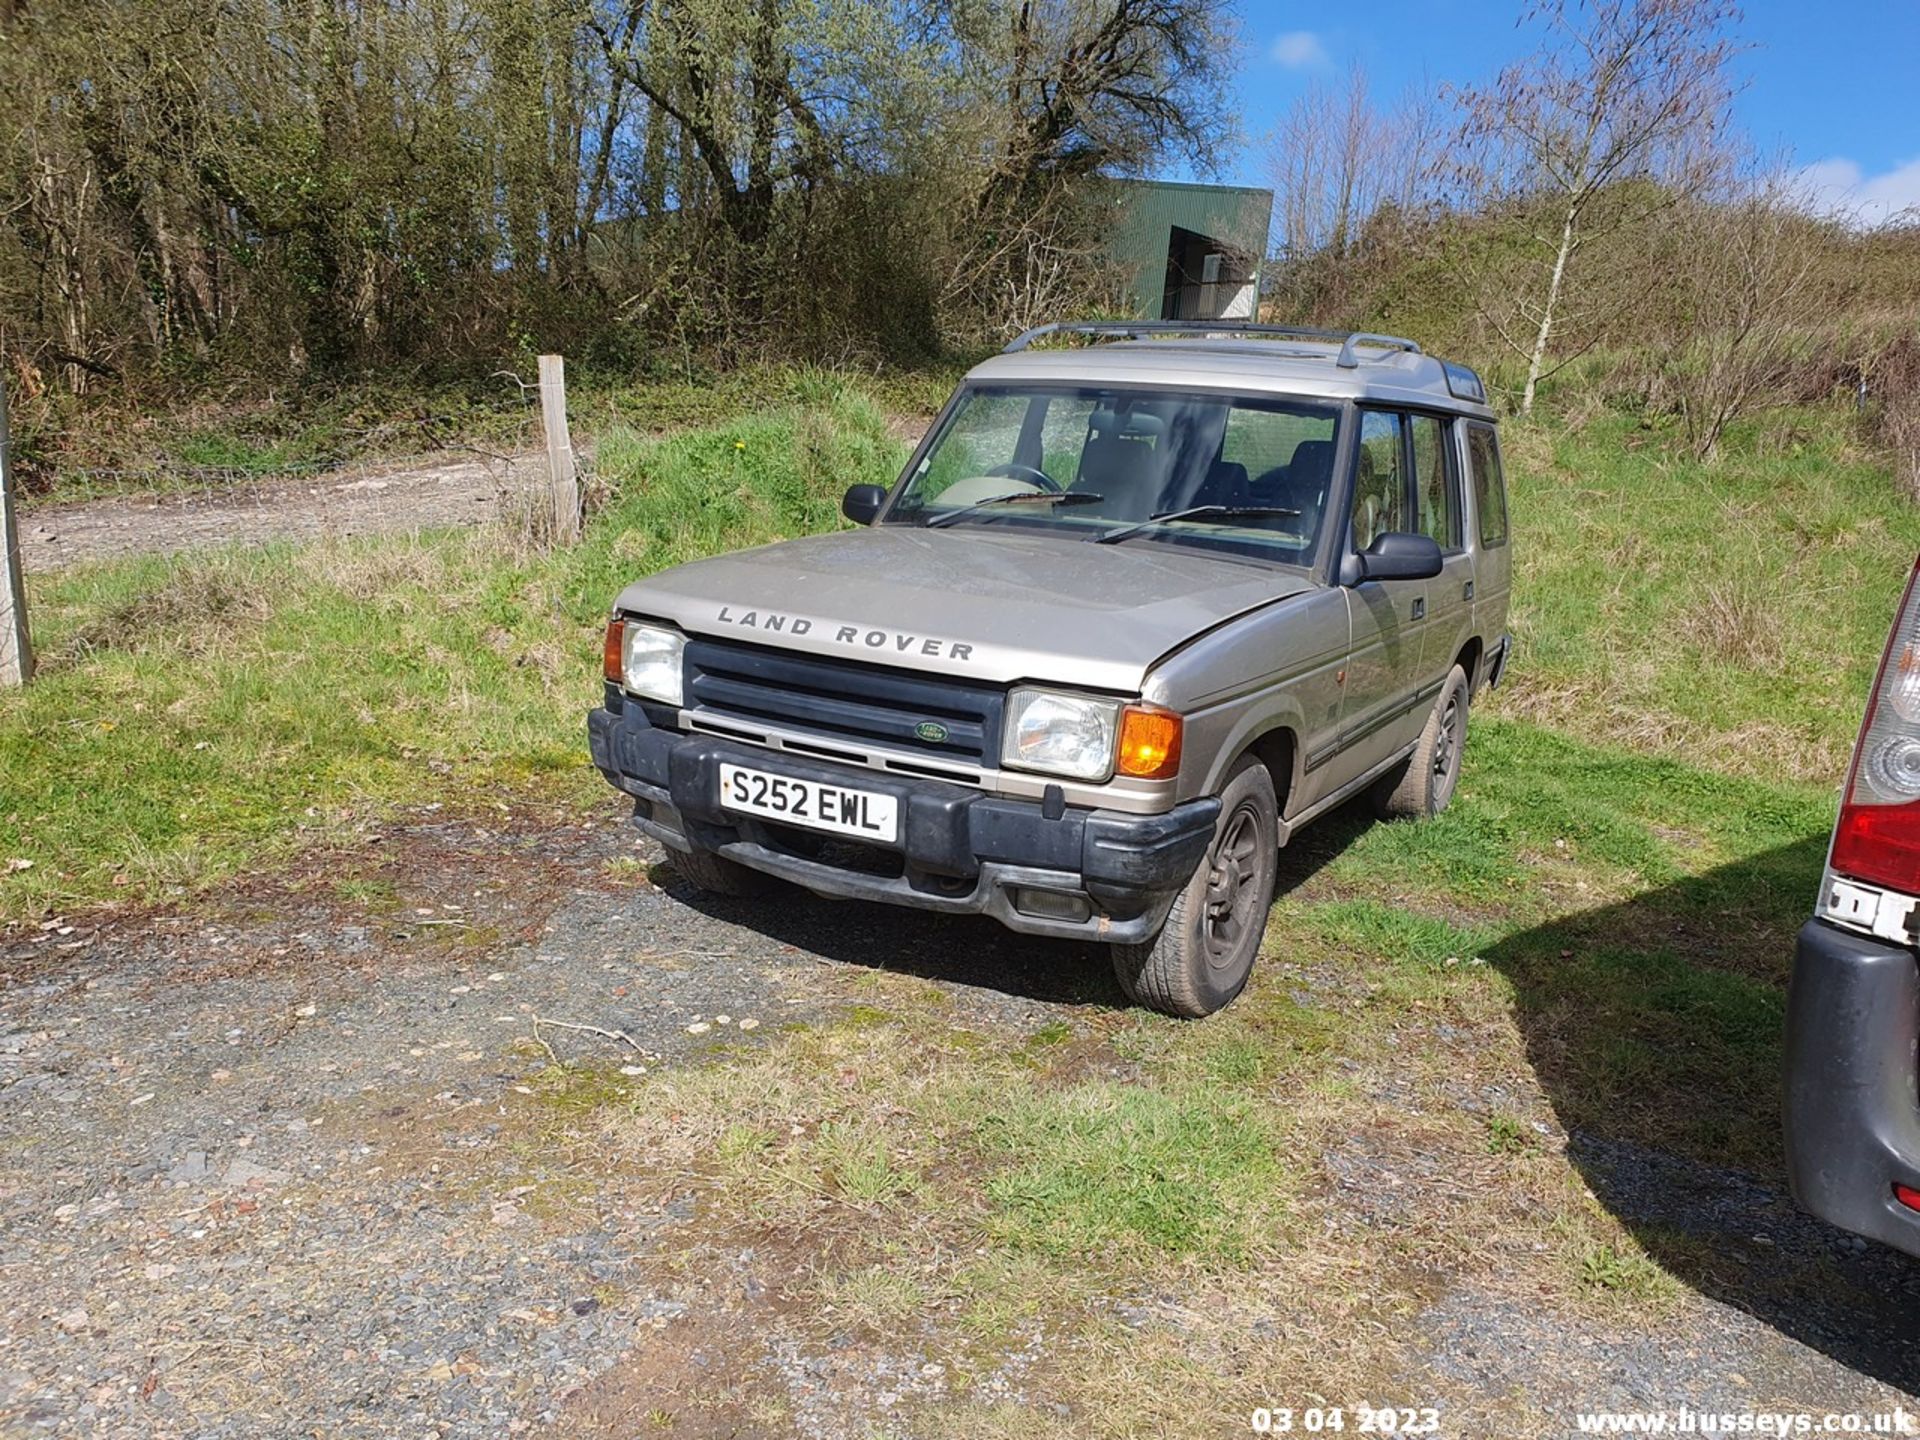 1998 LAND ROVER DISCOVERY ES TDI - 2495cc 5dr Estate (Gold) - Image 3 of 31